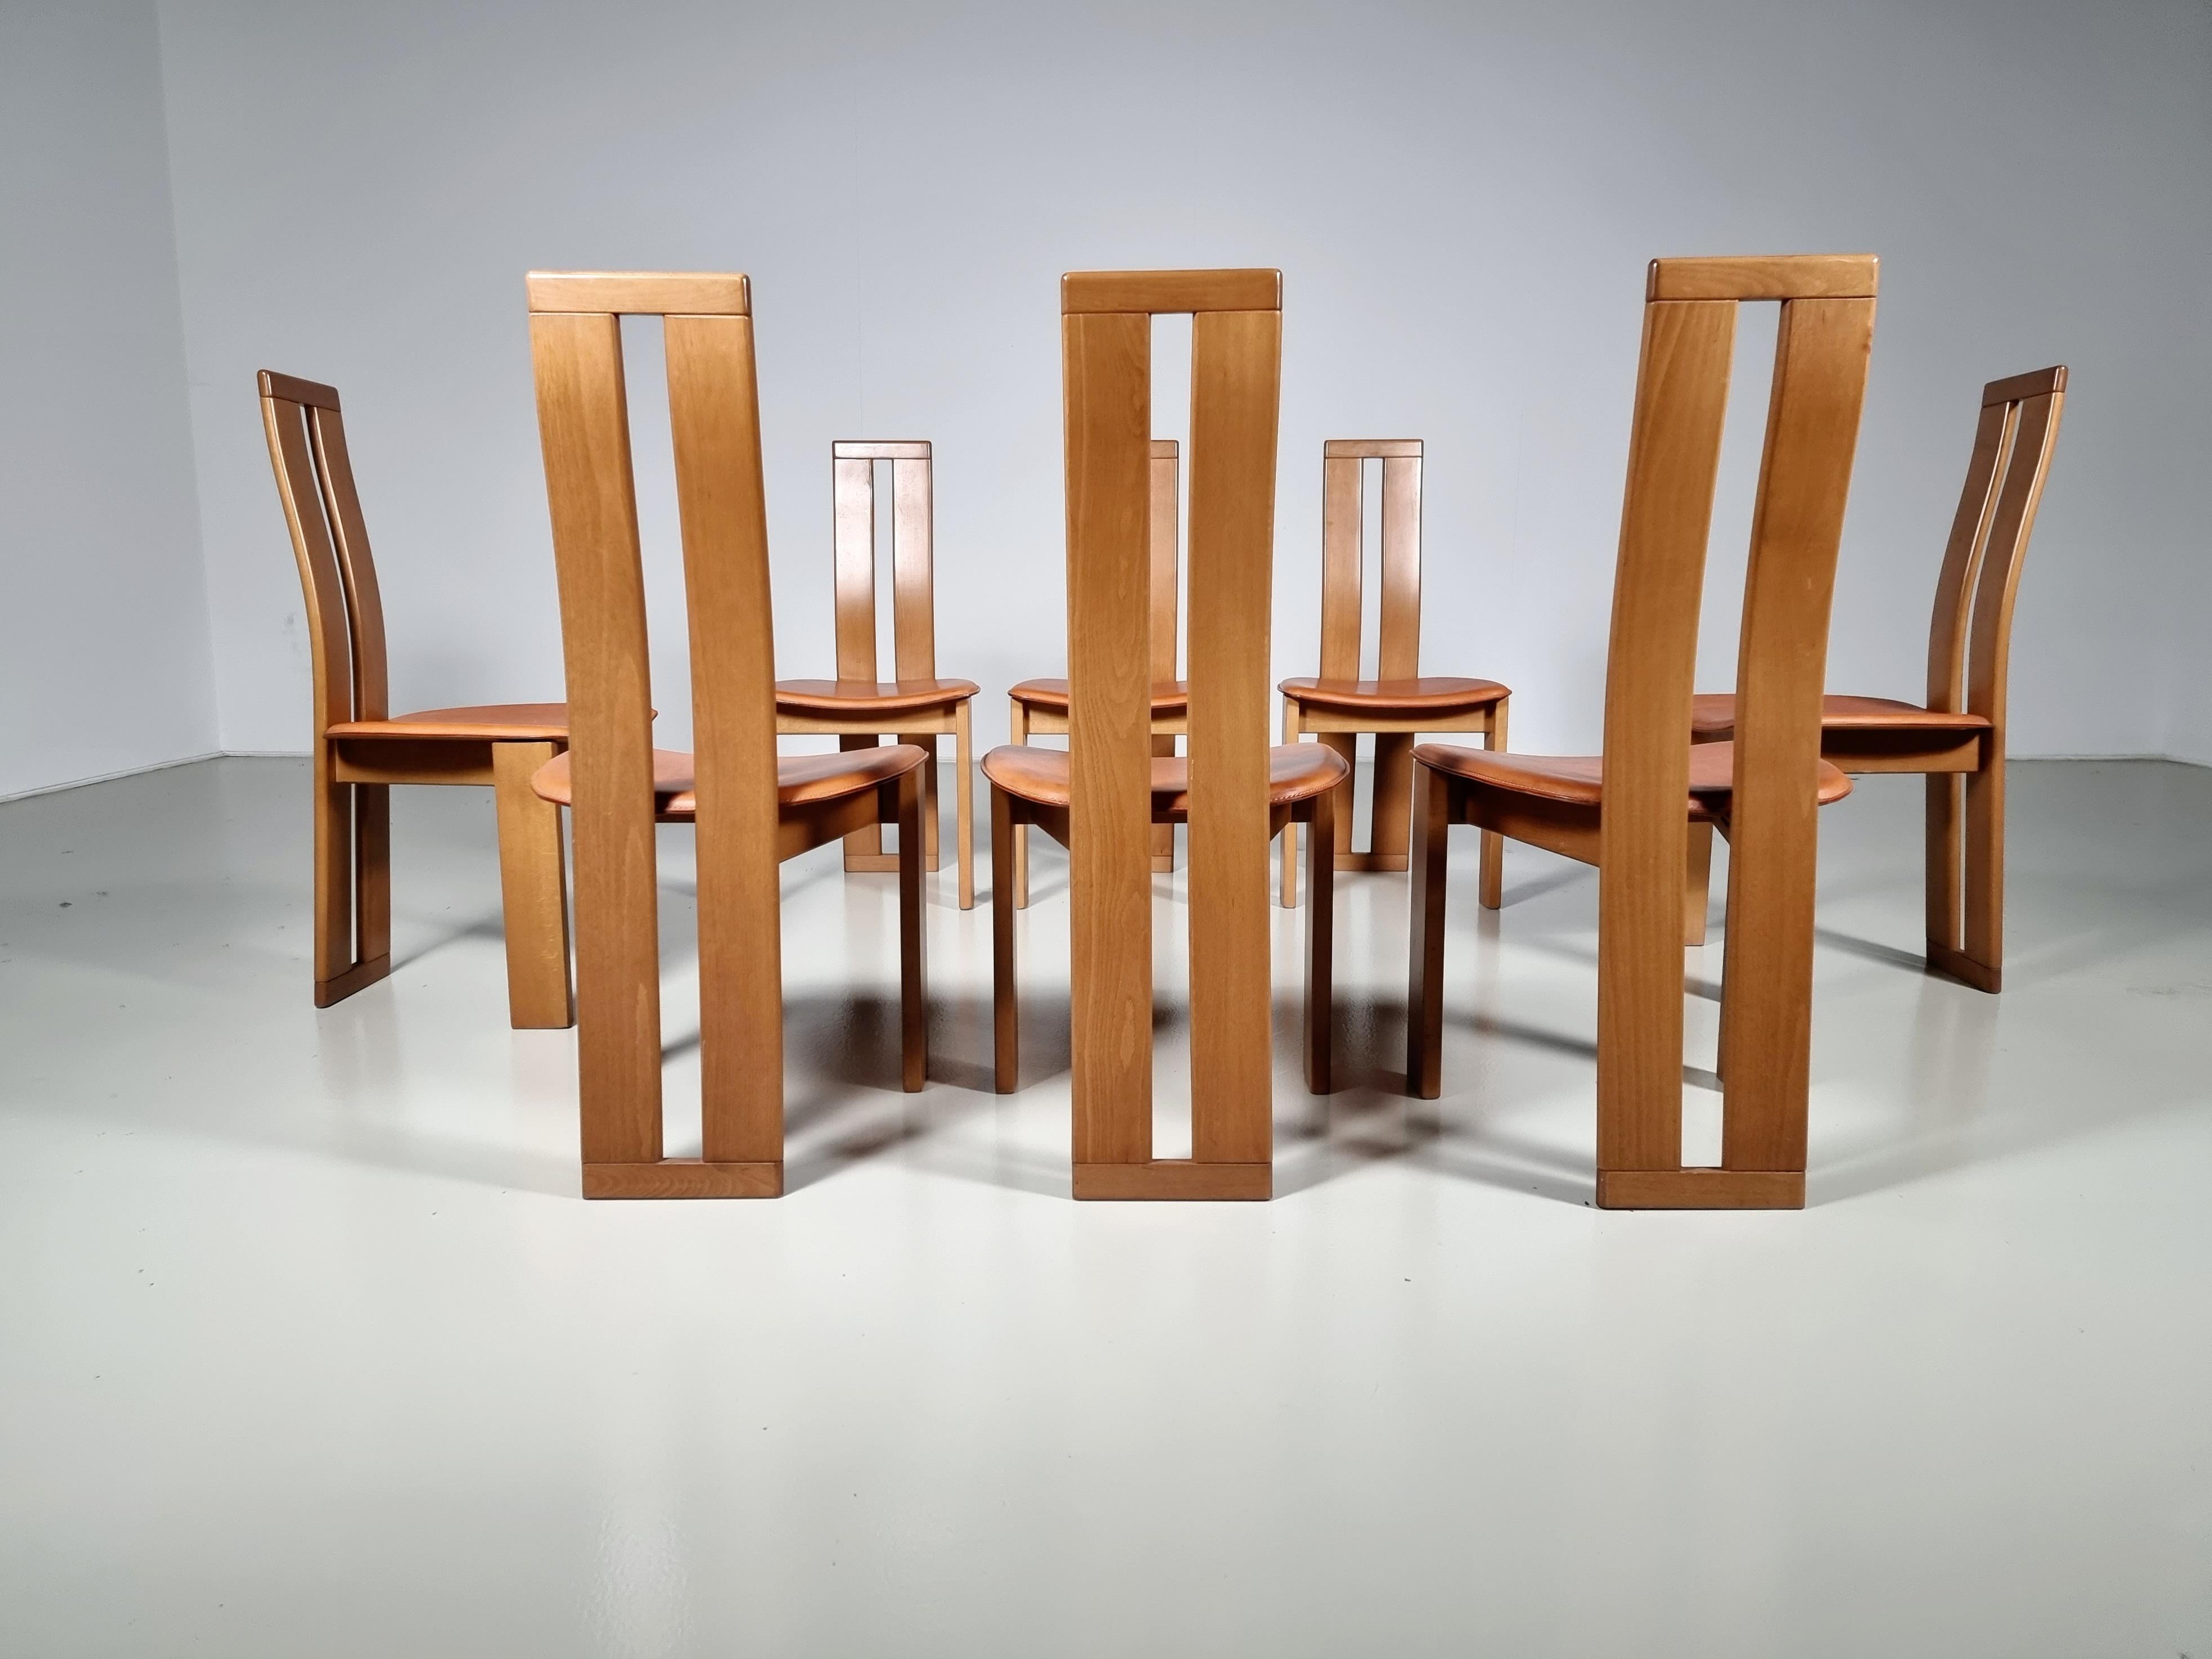 Late 20th Century Set of 8 Dining Chairs by Mario Marenco for Mobil Girgi, Italy, 1970s